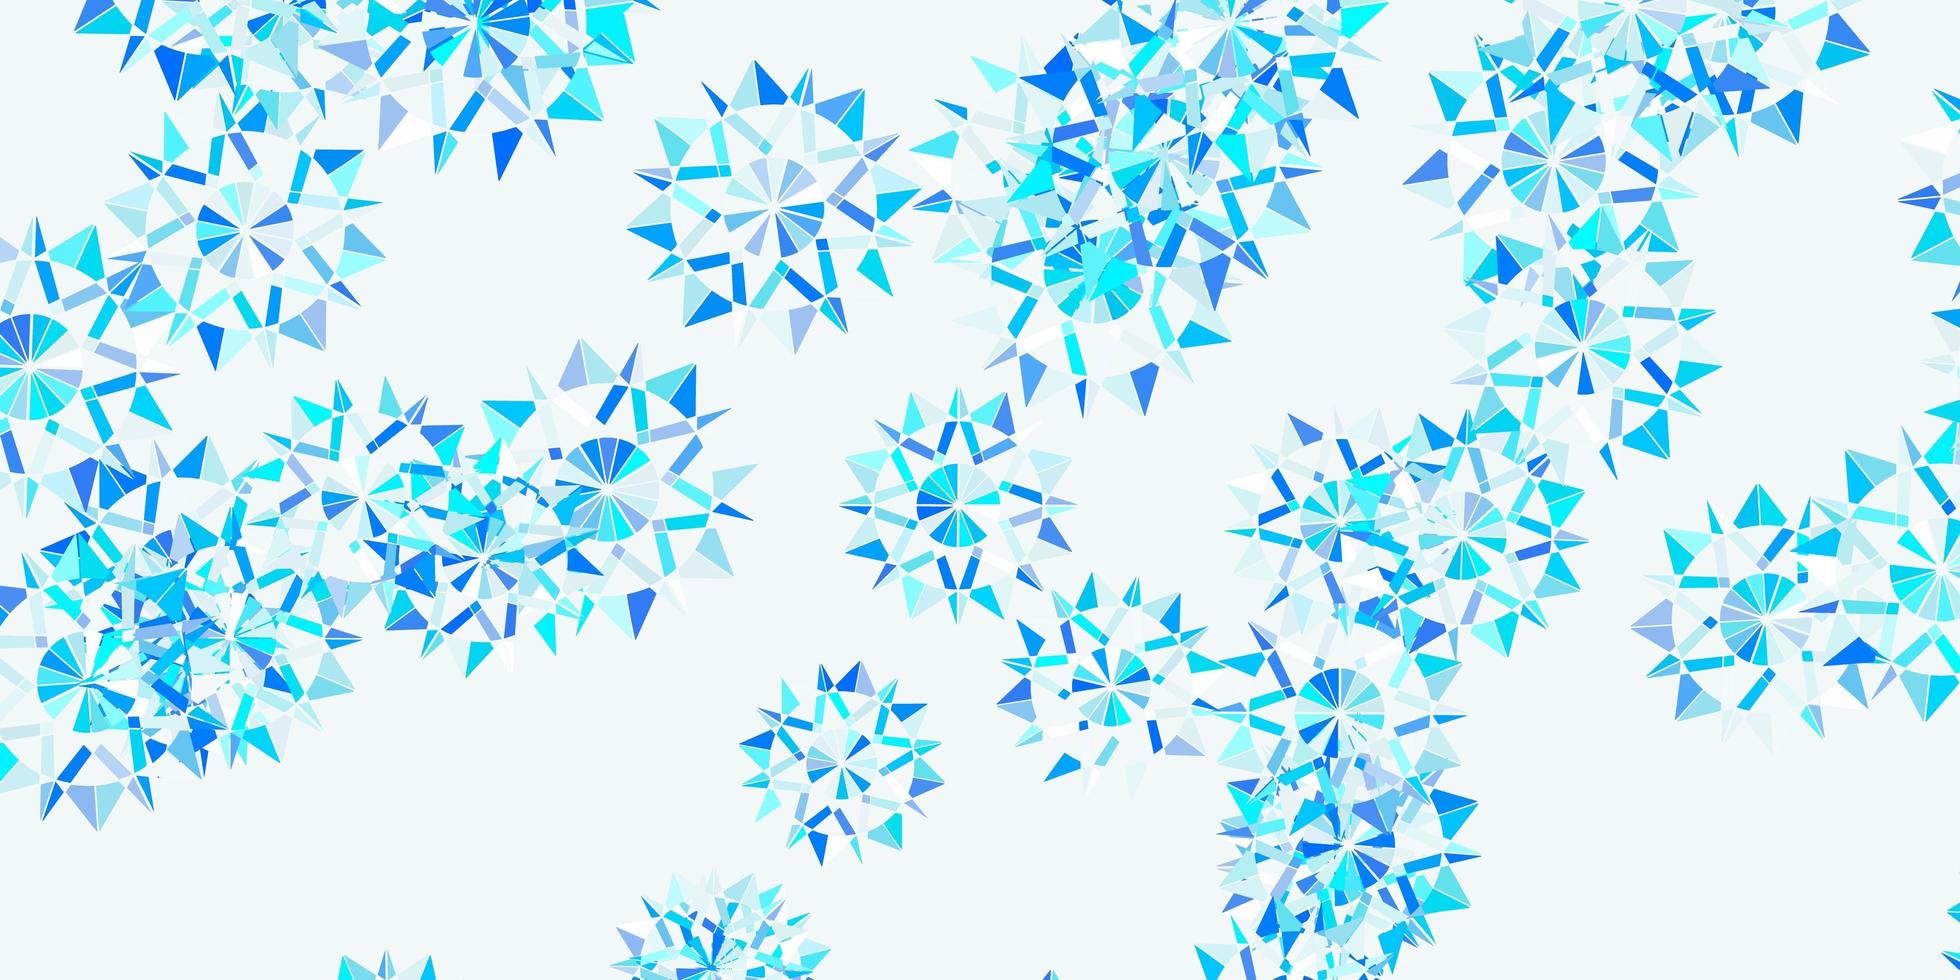 Light blue vector beautiful snowflakes backdrop with flowers